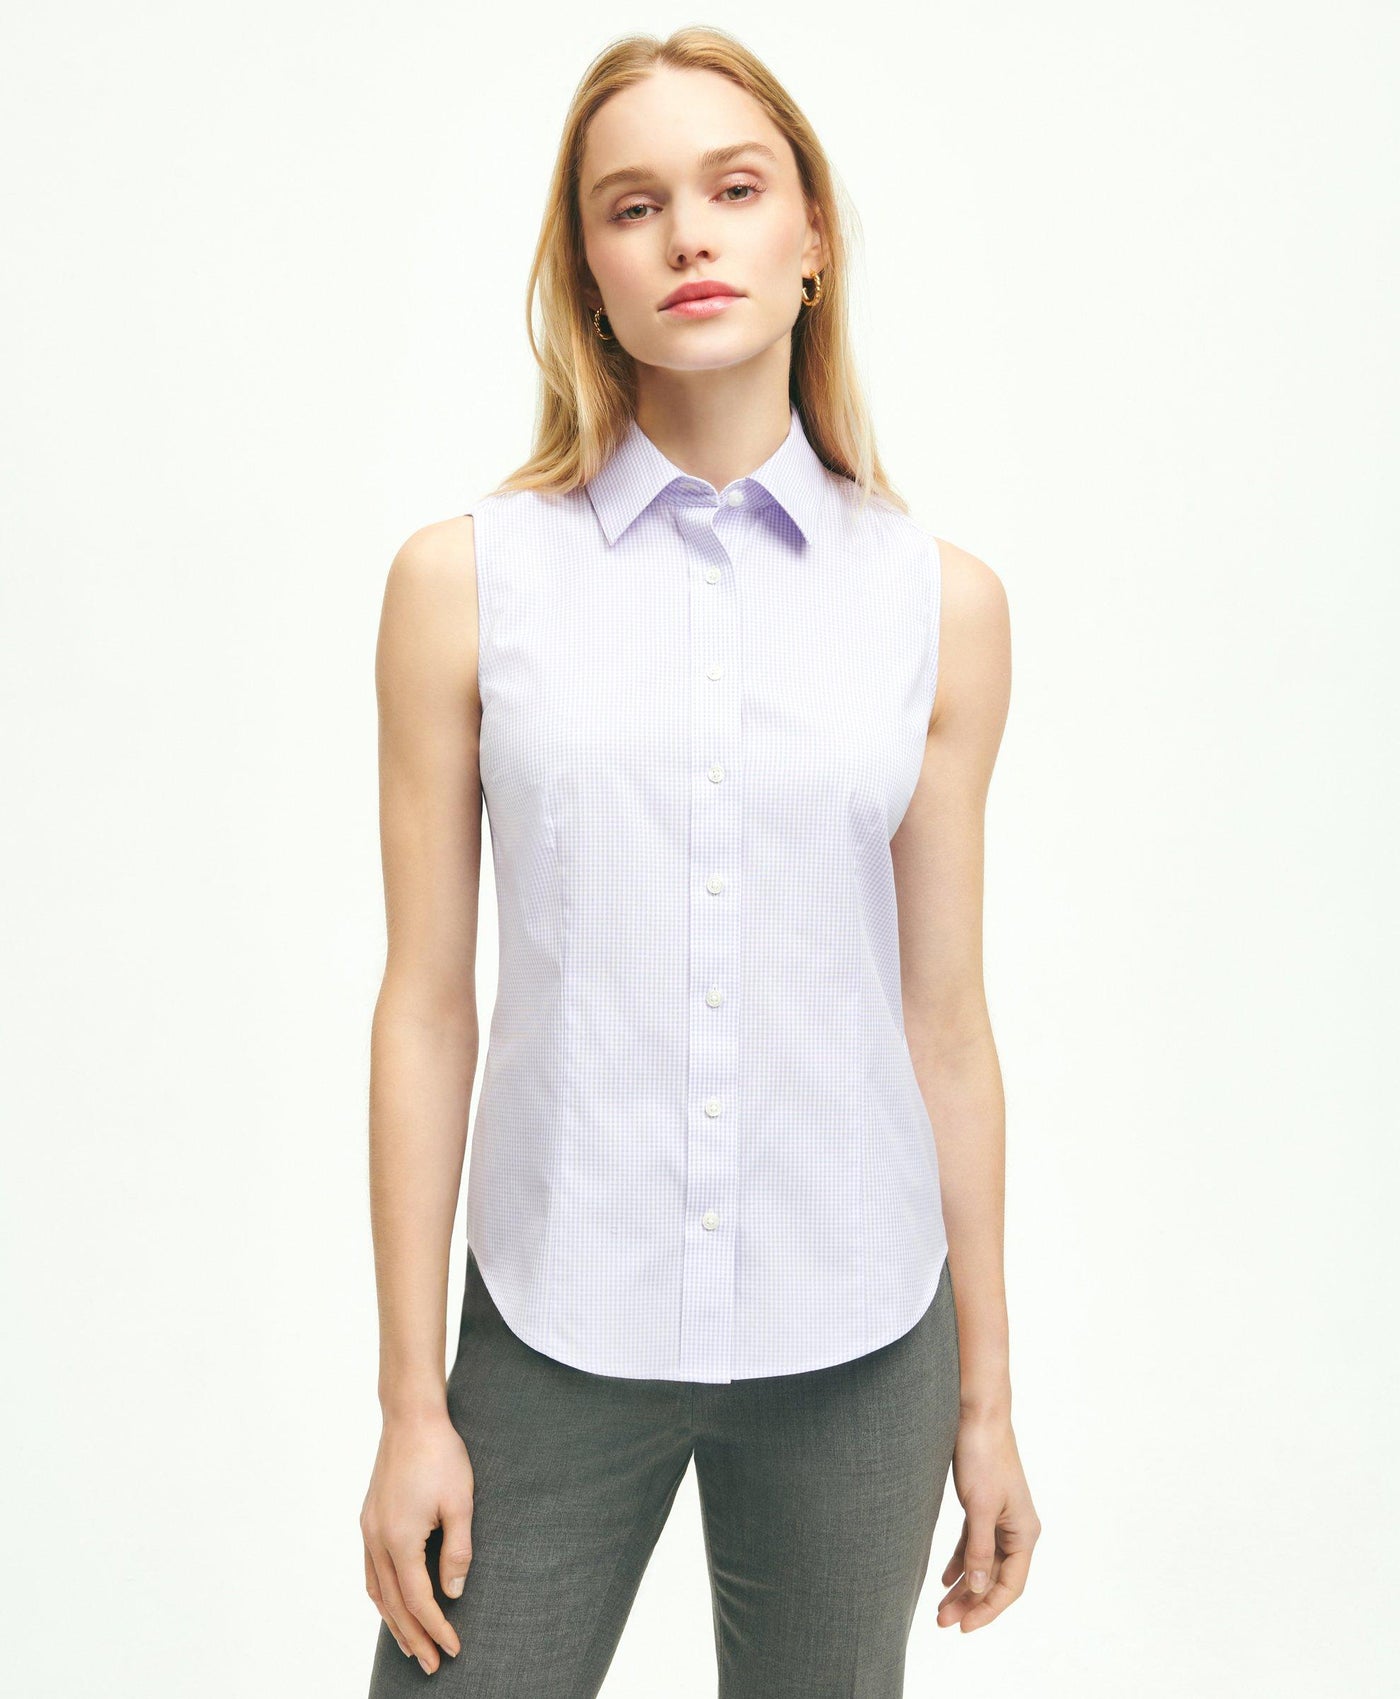 Fitted Supima Cotton Non-Iron Sleeveless Gingham Shirt - Brooks Brothers Canada